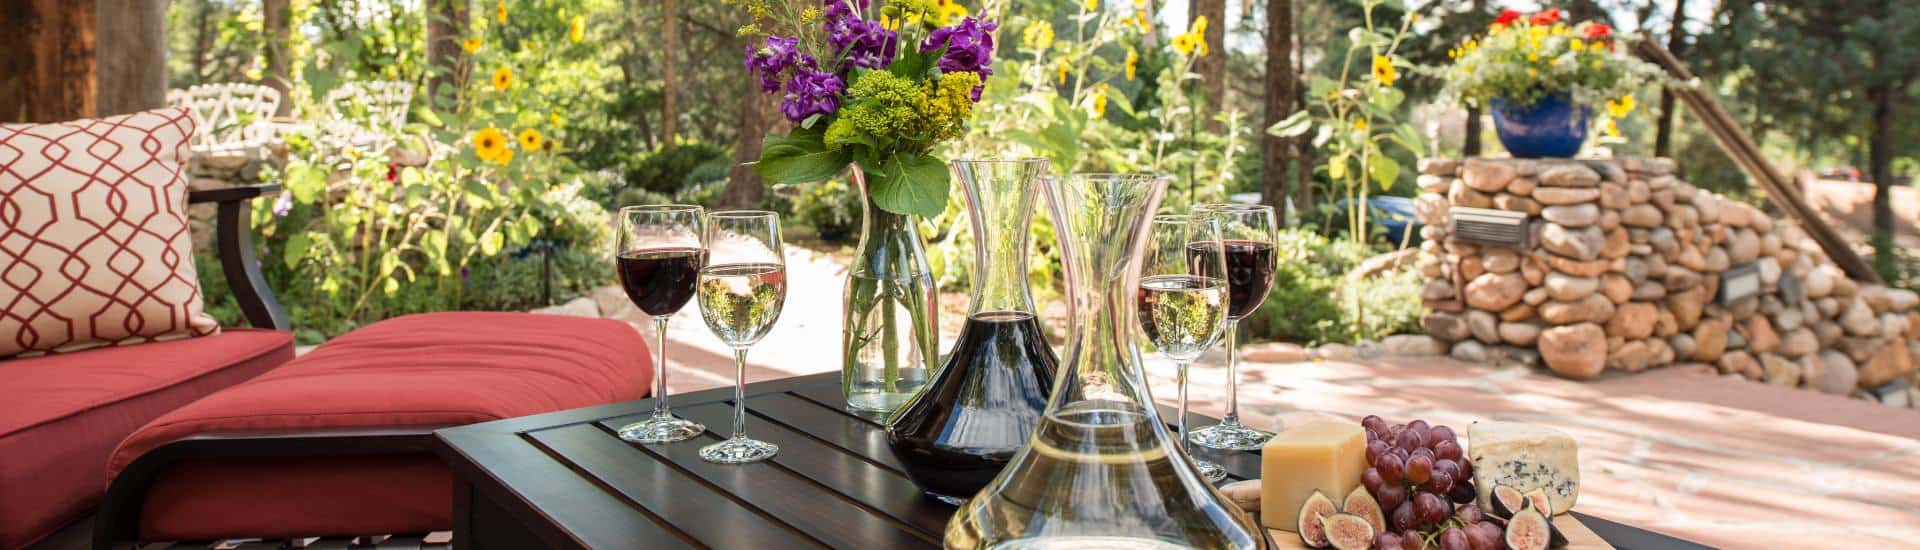 Wine decanters and glasses on wooden patio table outdoors in dappled light from garden.